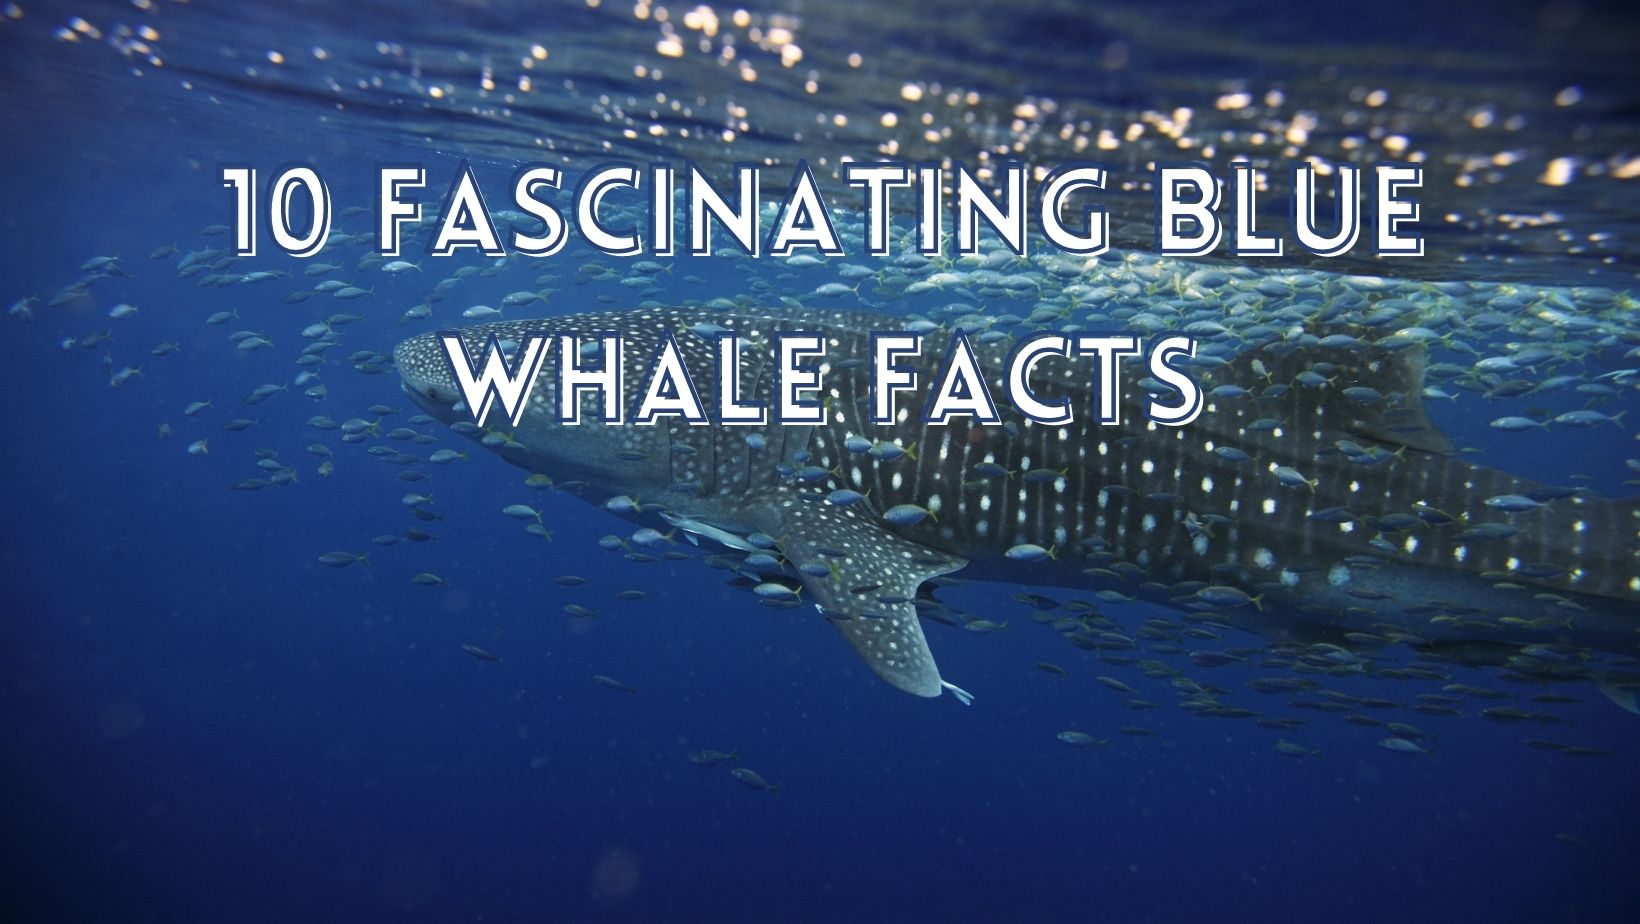 Blue whale facts